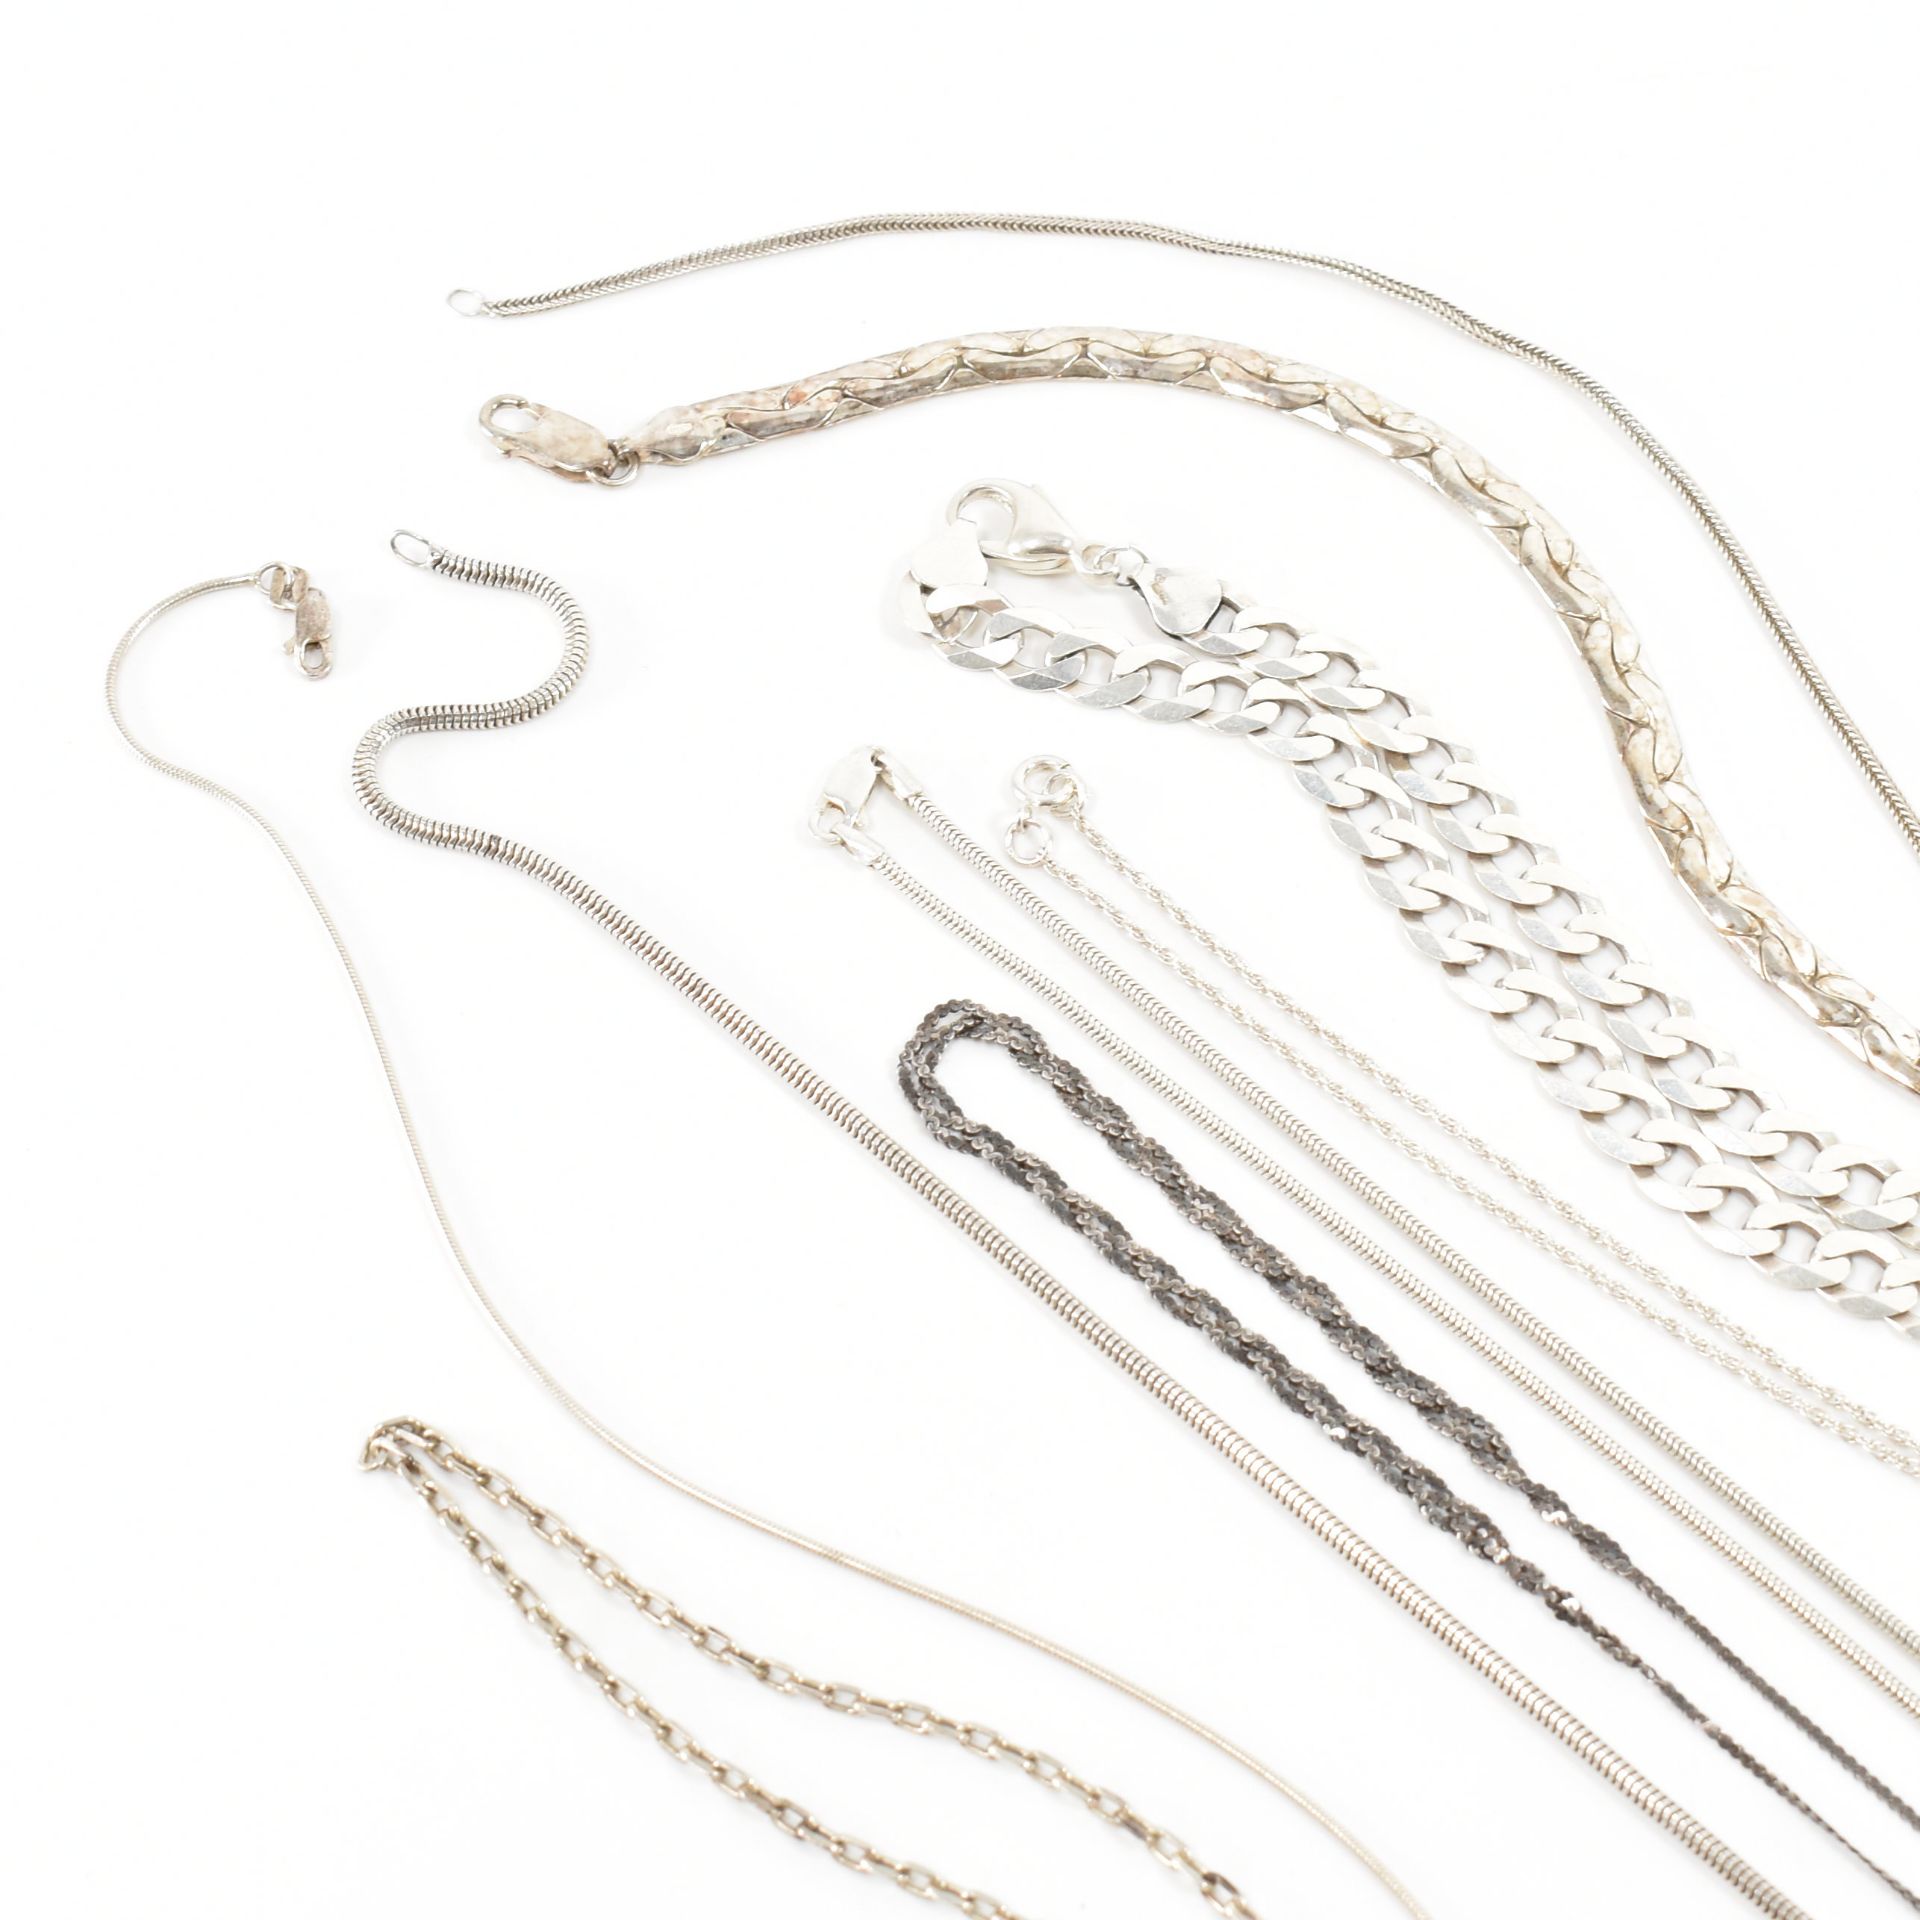 COLLECTION OF ASSORTED 925 SILVER NECKLACE CHAINS - Image 3 of 4